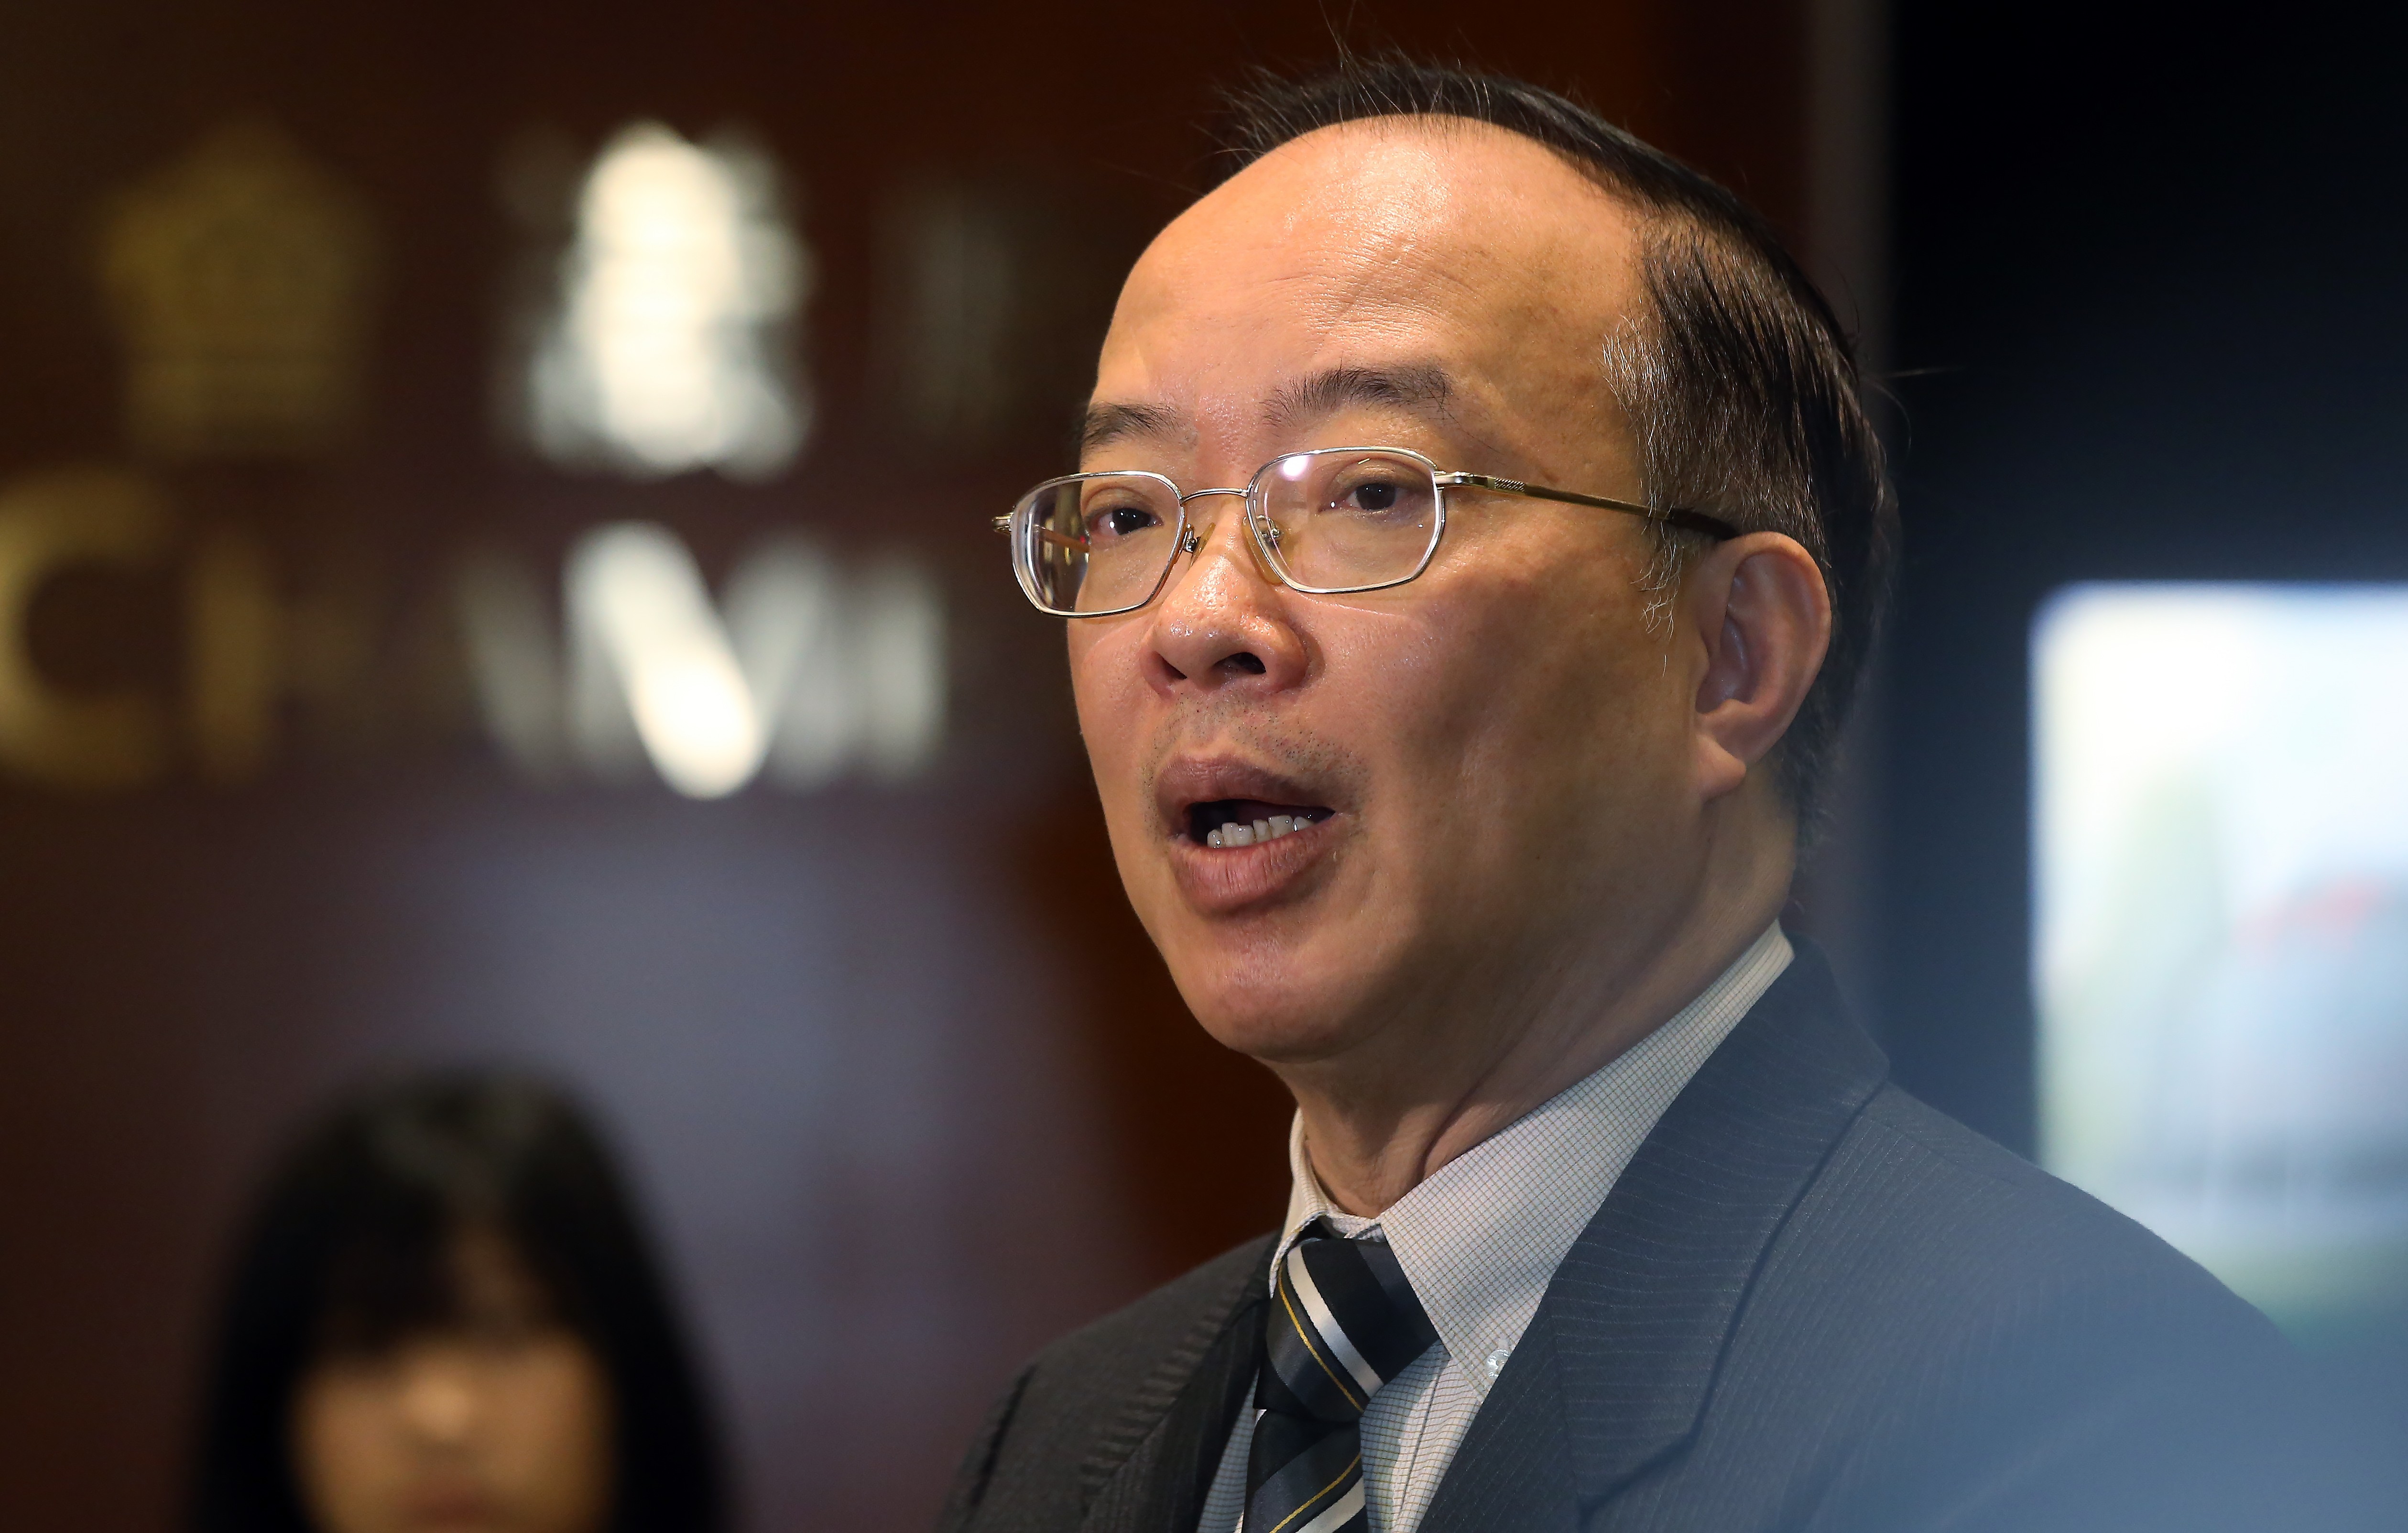 Ma Fung-kwok dismissed the airport exchange as a “small incident”. Photo: Dickson Lee